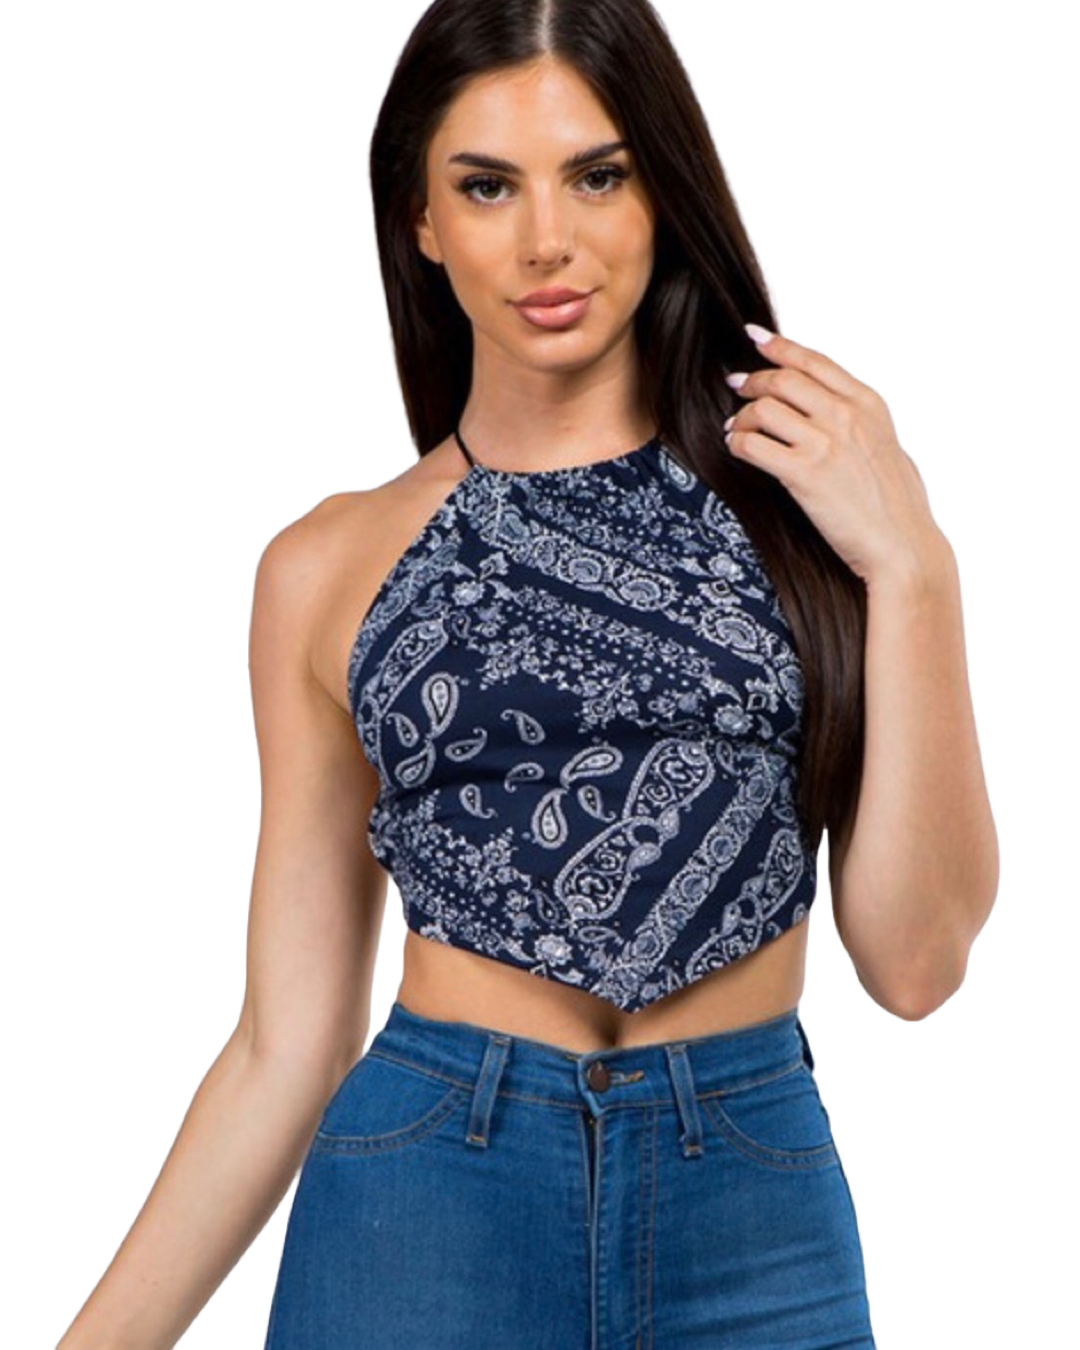 Brown Set It Off Bandana Strappy Halter Top – Do It With Soul